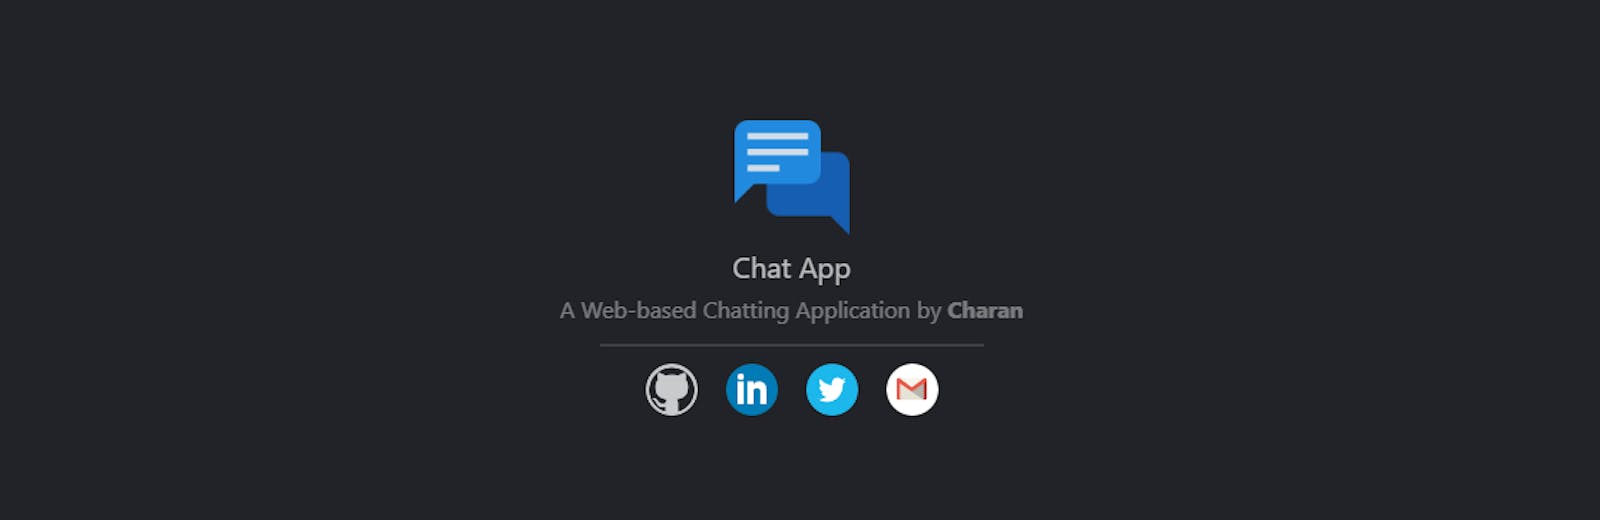 How to Build a Chat App / WhatsApp Clone (Technologies, Methods and Architecture)